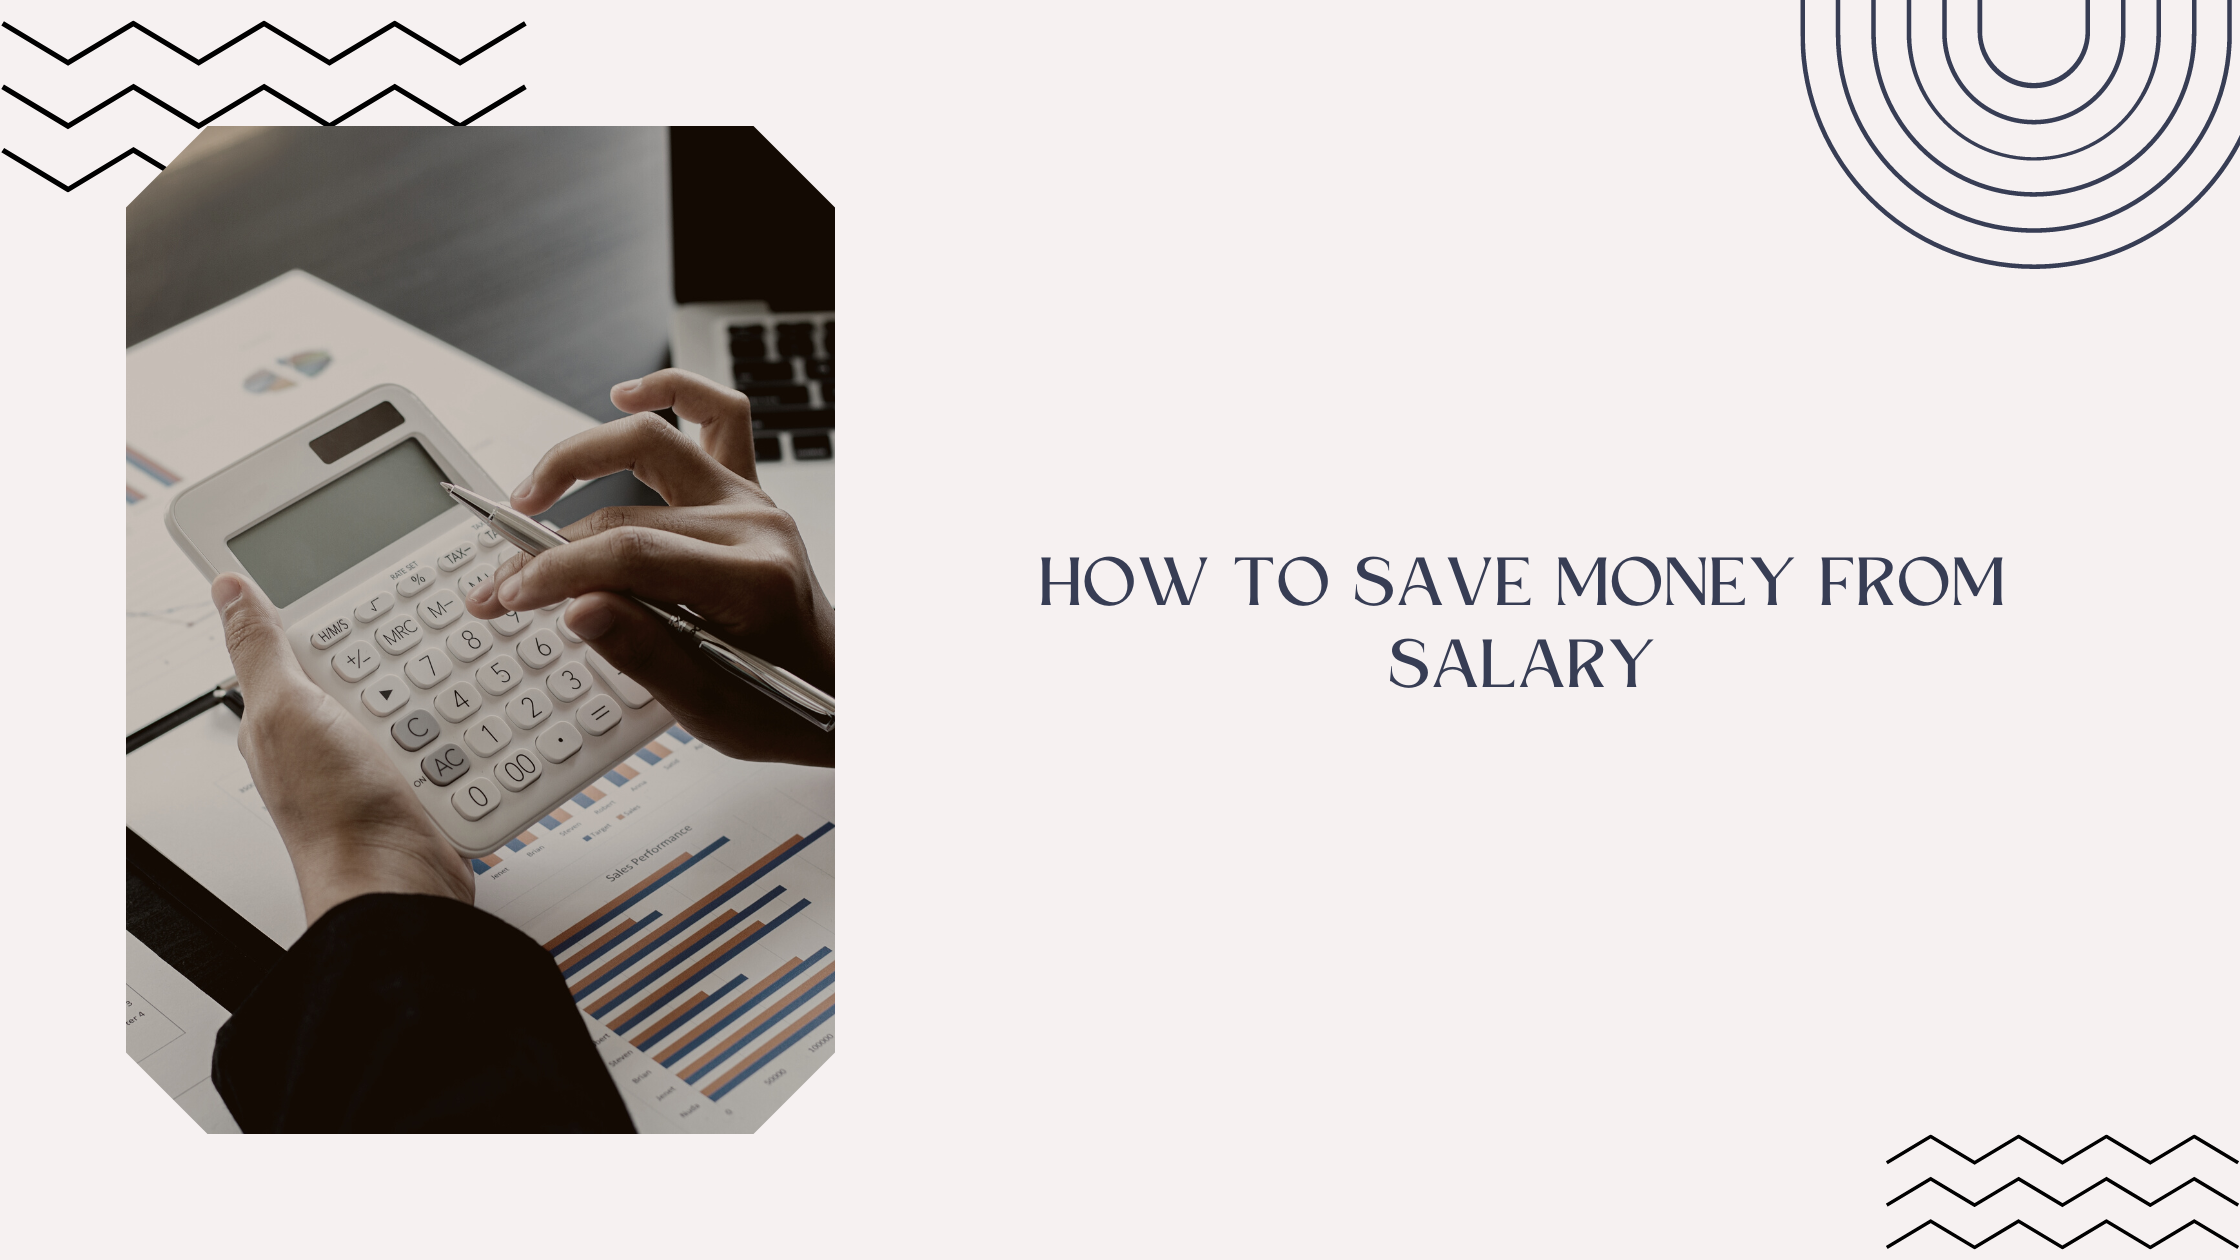 How to save money from salary feature image.